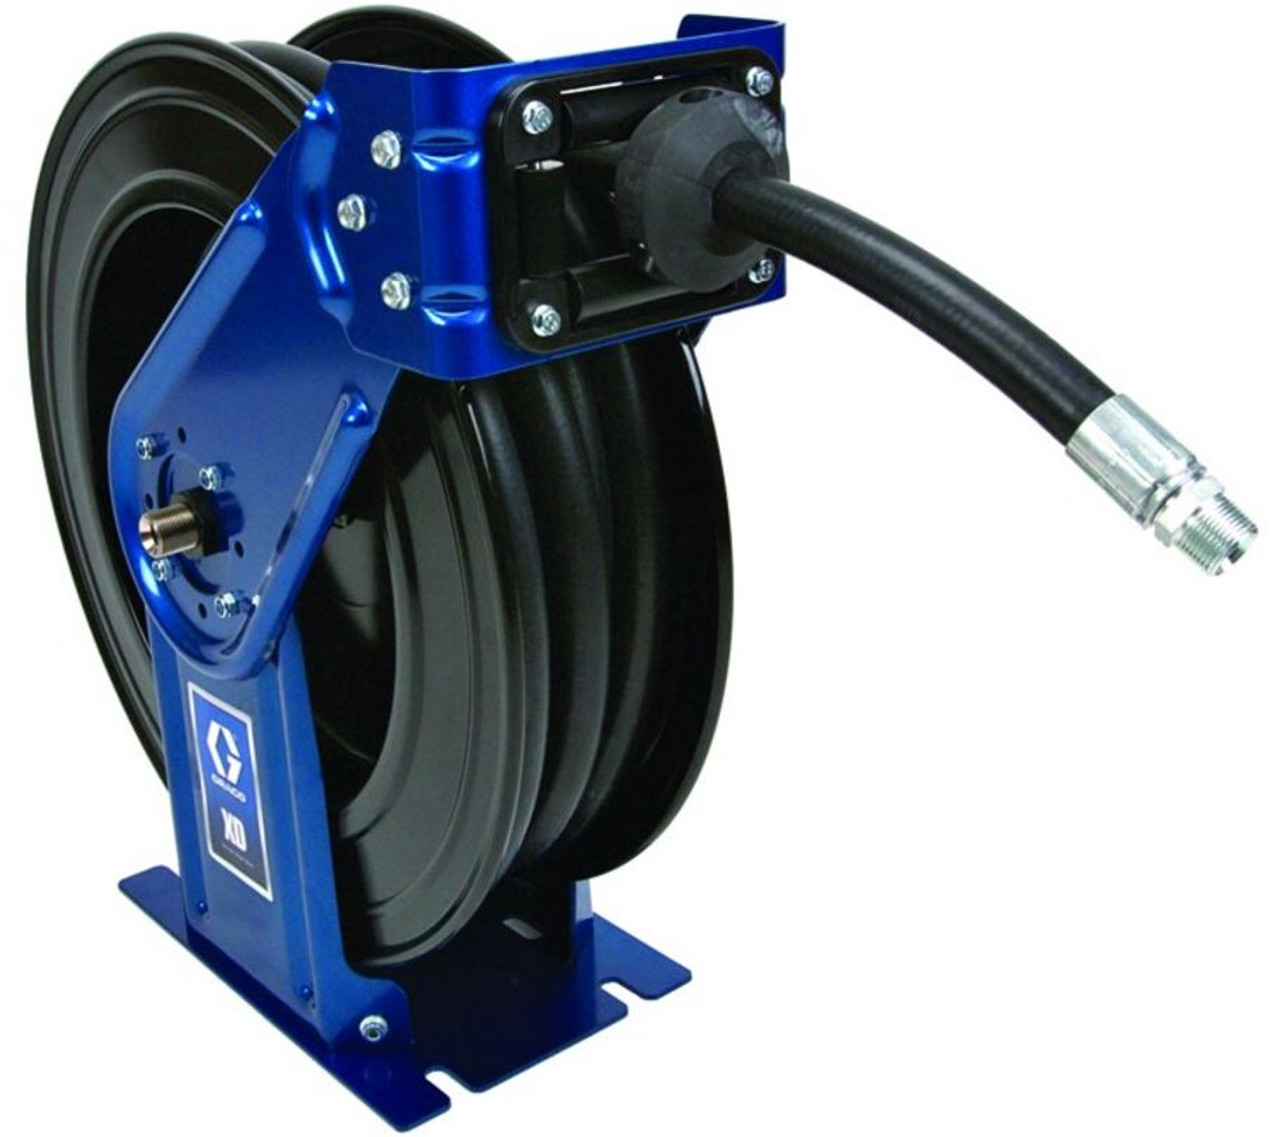 Graco 1/2 in. x 75 ft. XD30 Series Heavy Duty Spring Driven Air & Water  Hose Reel